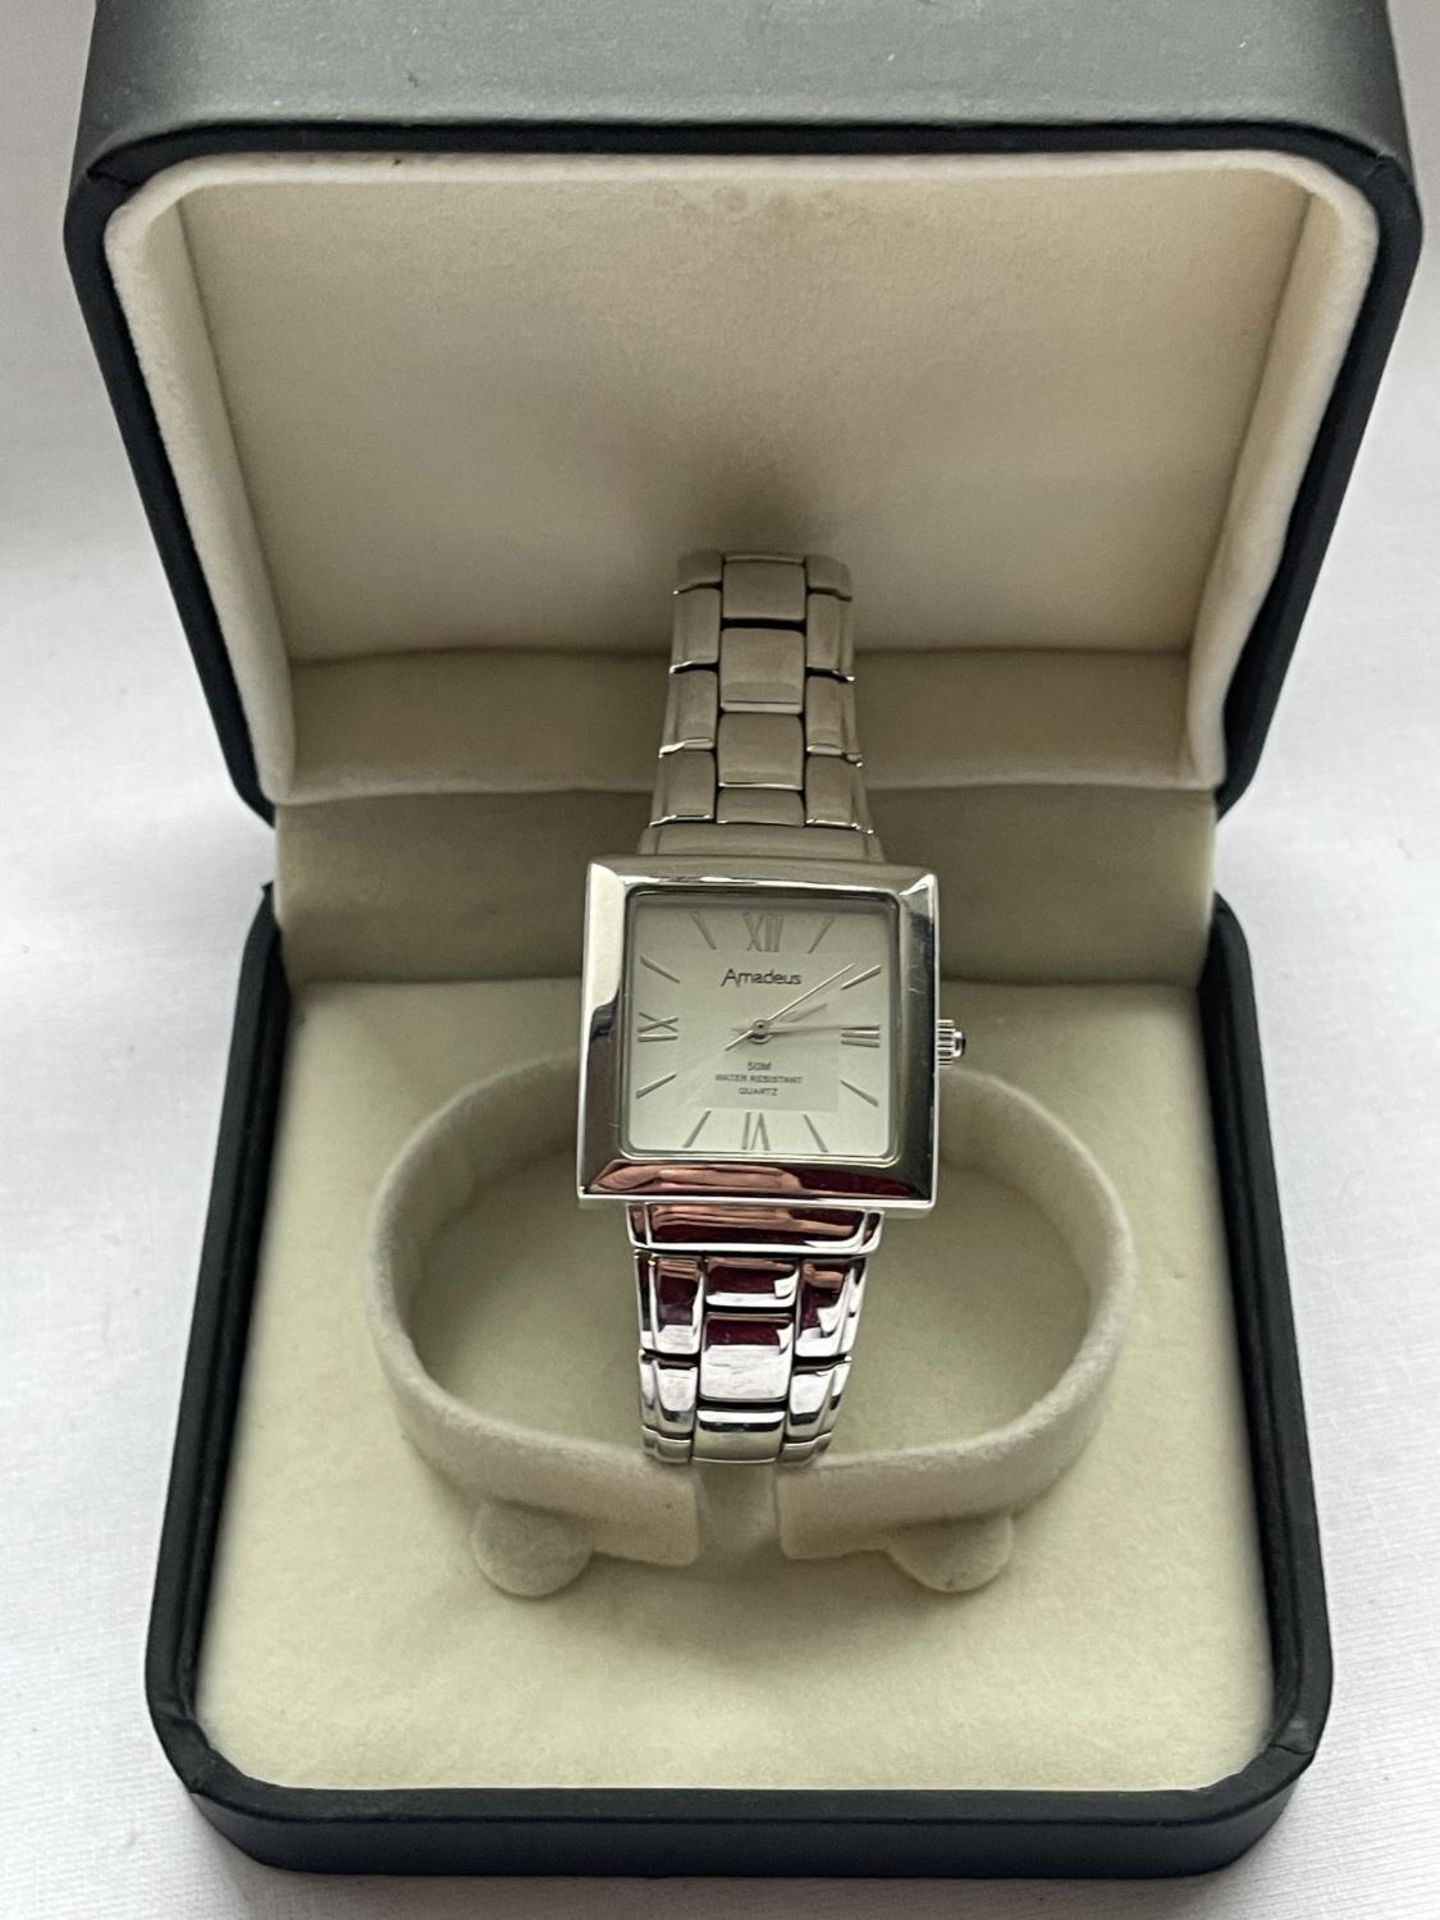 A SQUARE FACED AMADEUS AUTOMATIC WRIST WATCH IN A PRESENTATION BOX SEEN WORKING BUT NO WARRANTY